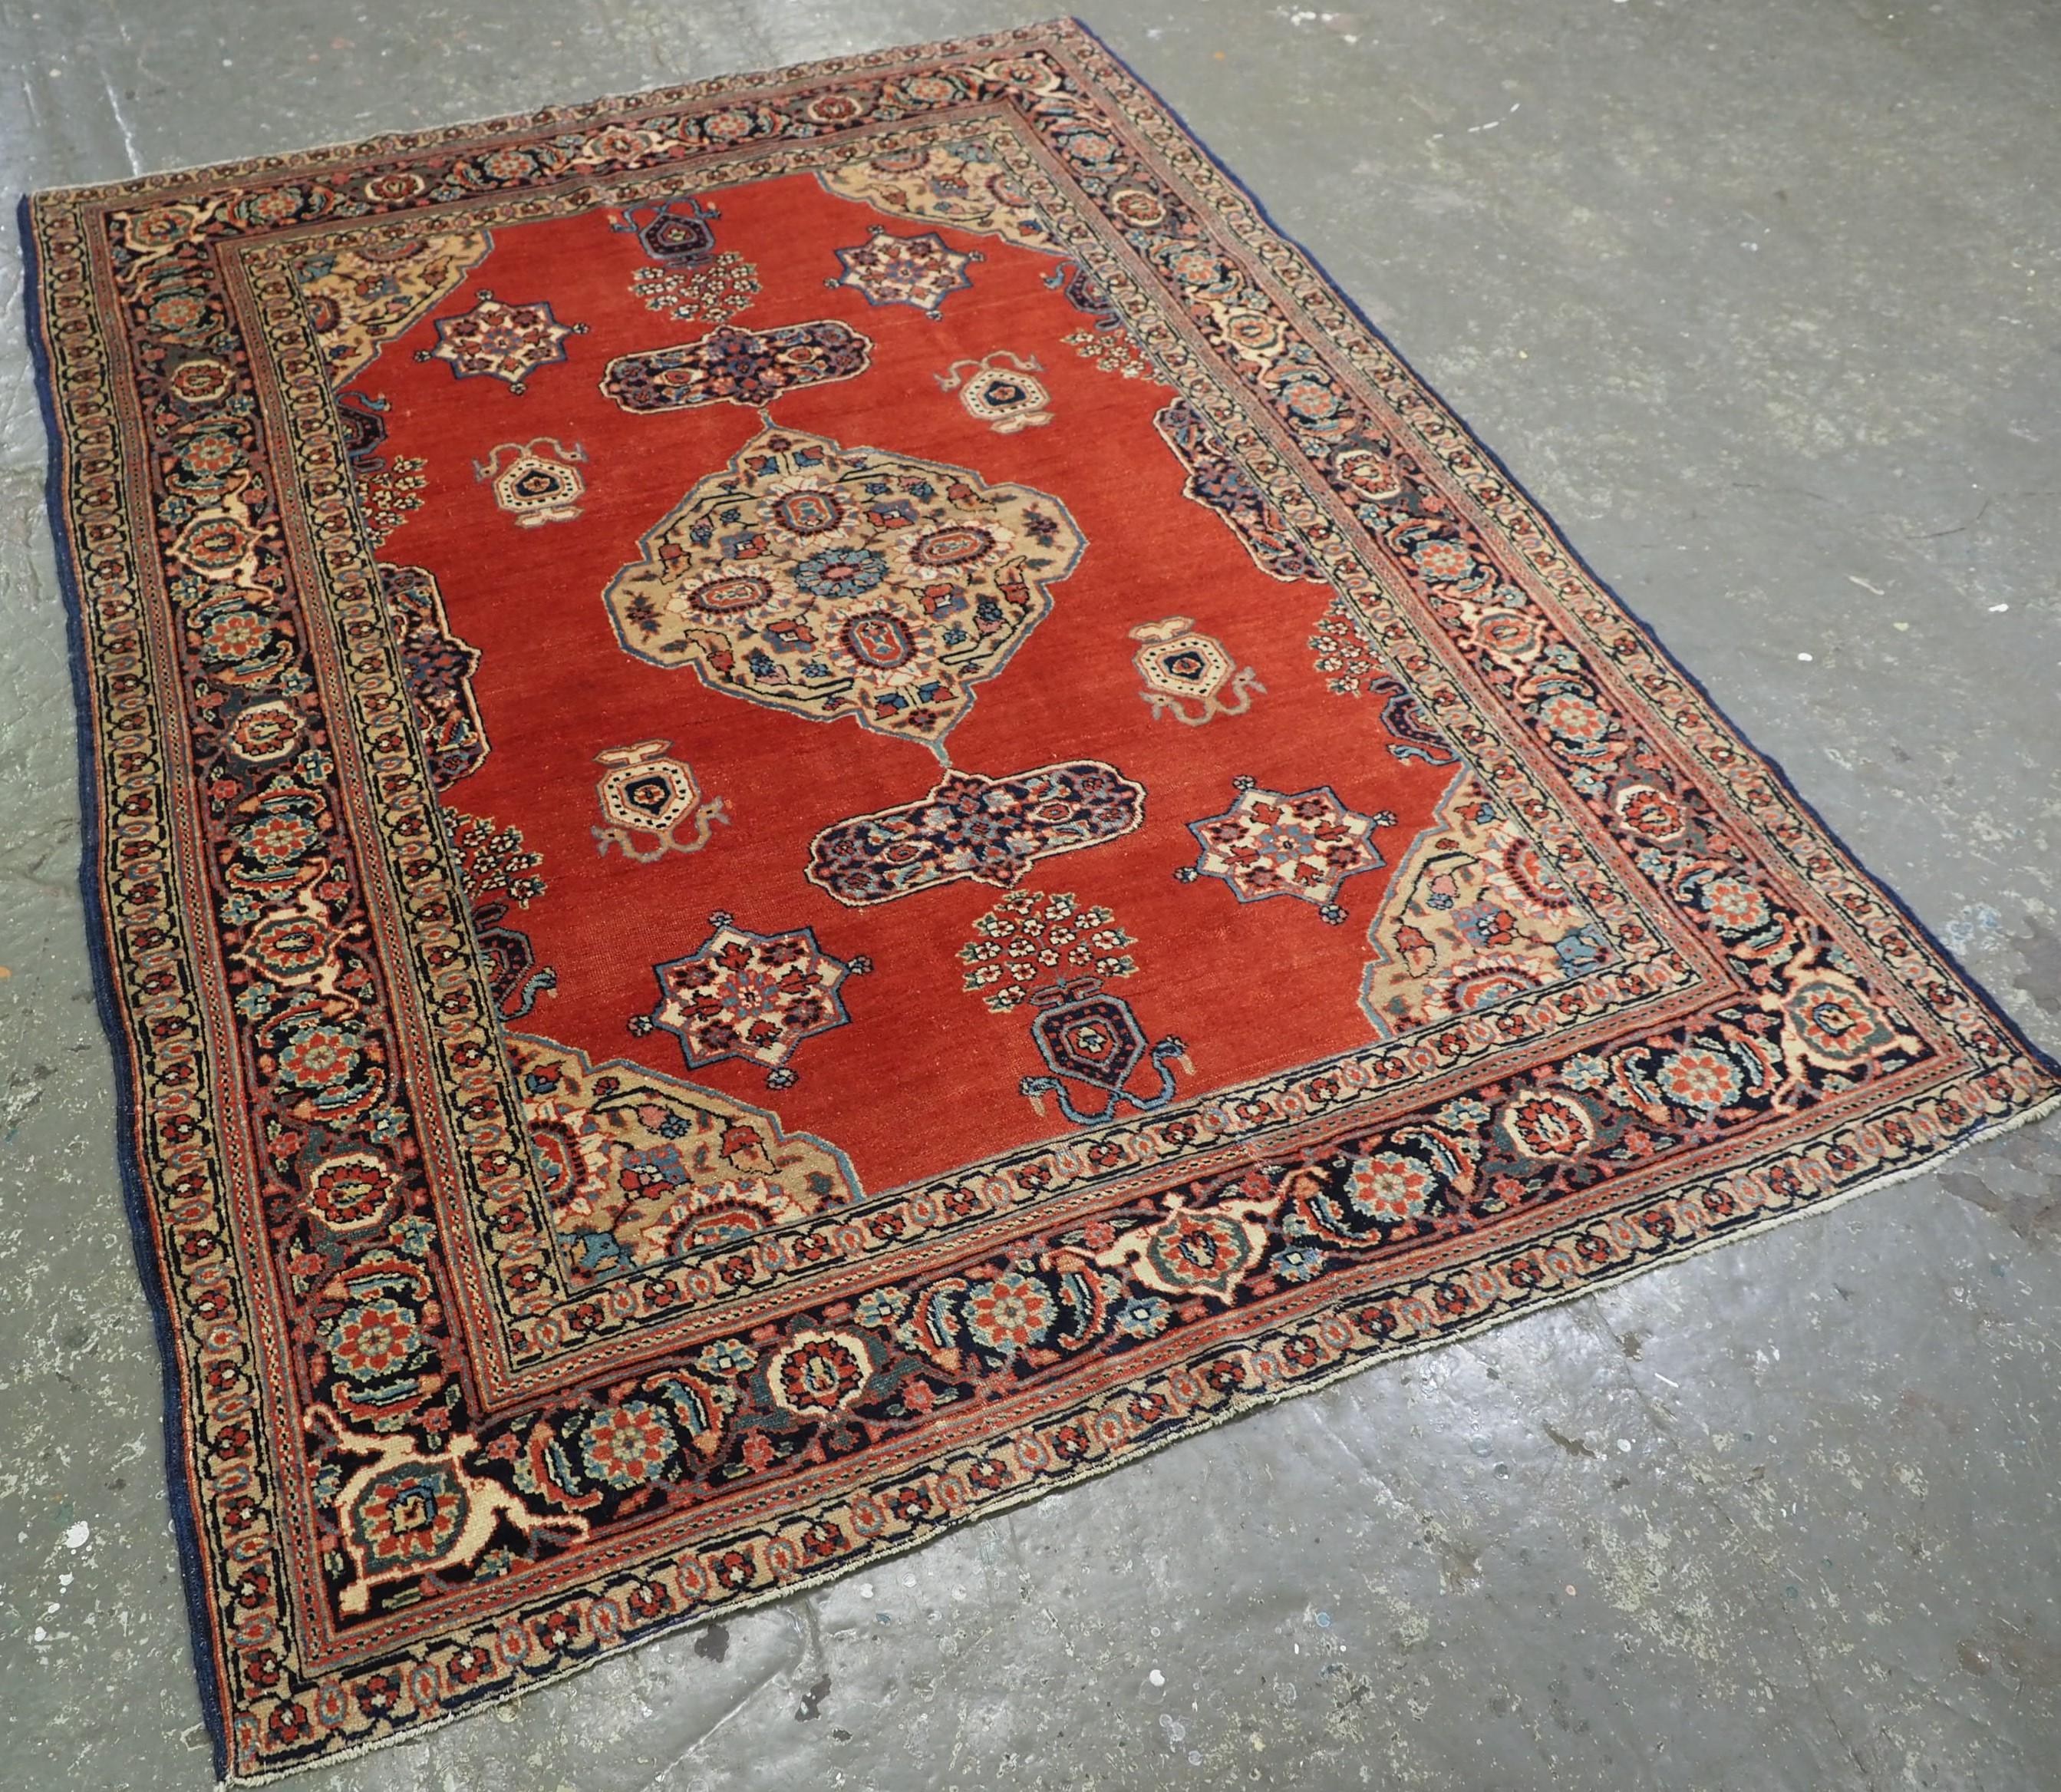 
Size: 6ft 0in x 4ft 8in (182 x 141cm).

Antique Tabriz region village rug of outstanding design with a small central medallion on a madder red ground.

Circa 1900.

The rug has a classical small medallion design with floral vases at each end, the